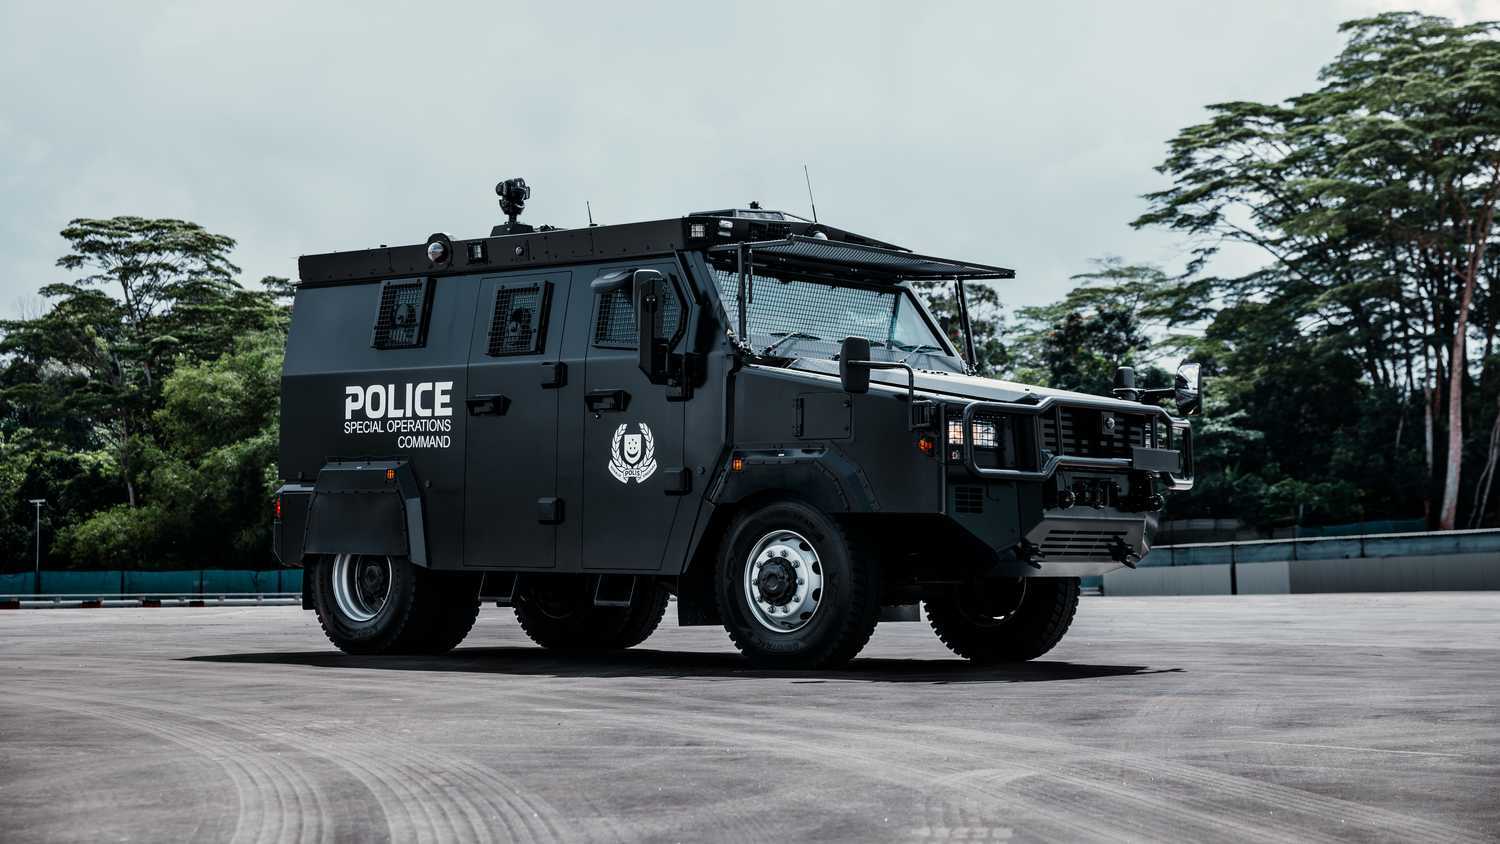 SPF's latest addition to the Special Operations Command arsenal, the Tactical Strike Vehicle. It's black in color and has the word "Police Special Operations Command" on its side with the SPF logo in white.